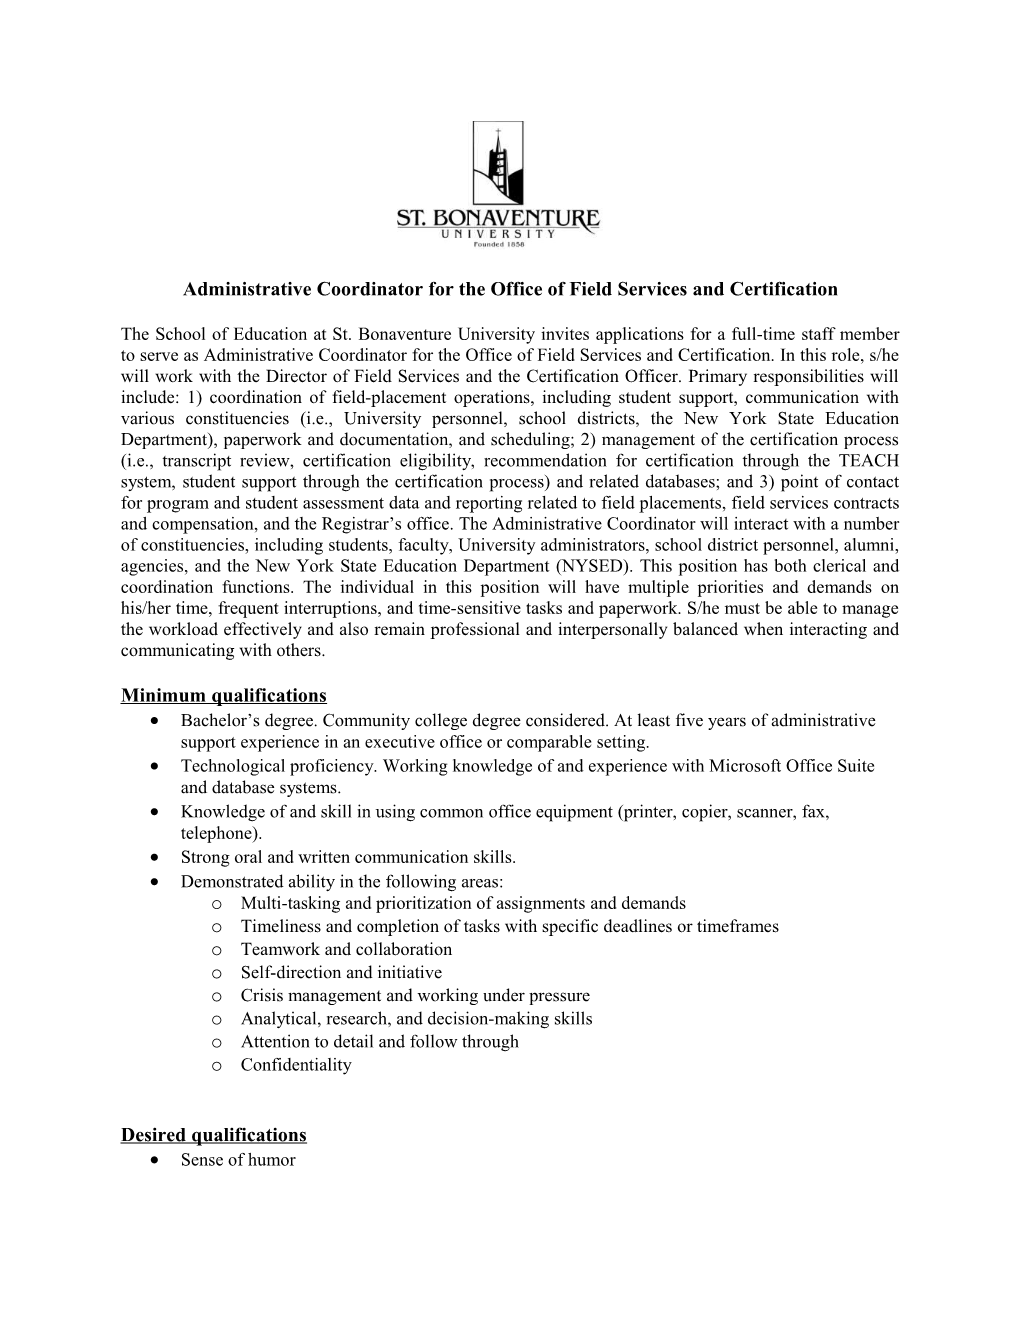 Administrative Coordinator for the Office of Field Services and Certification